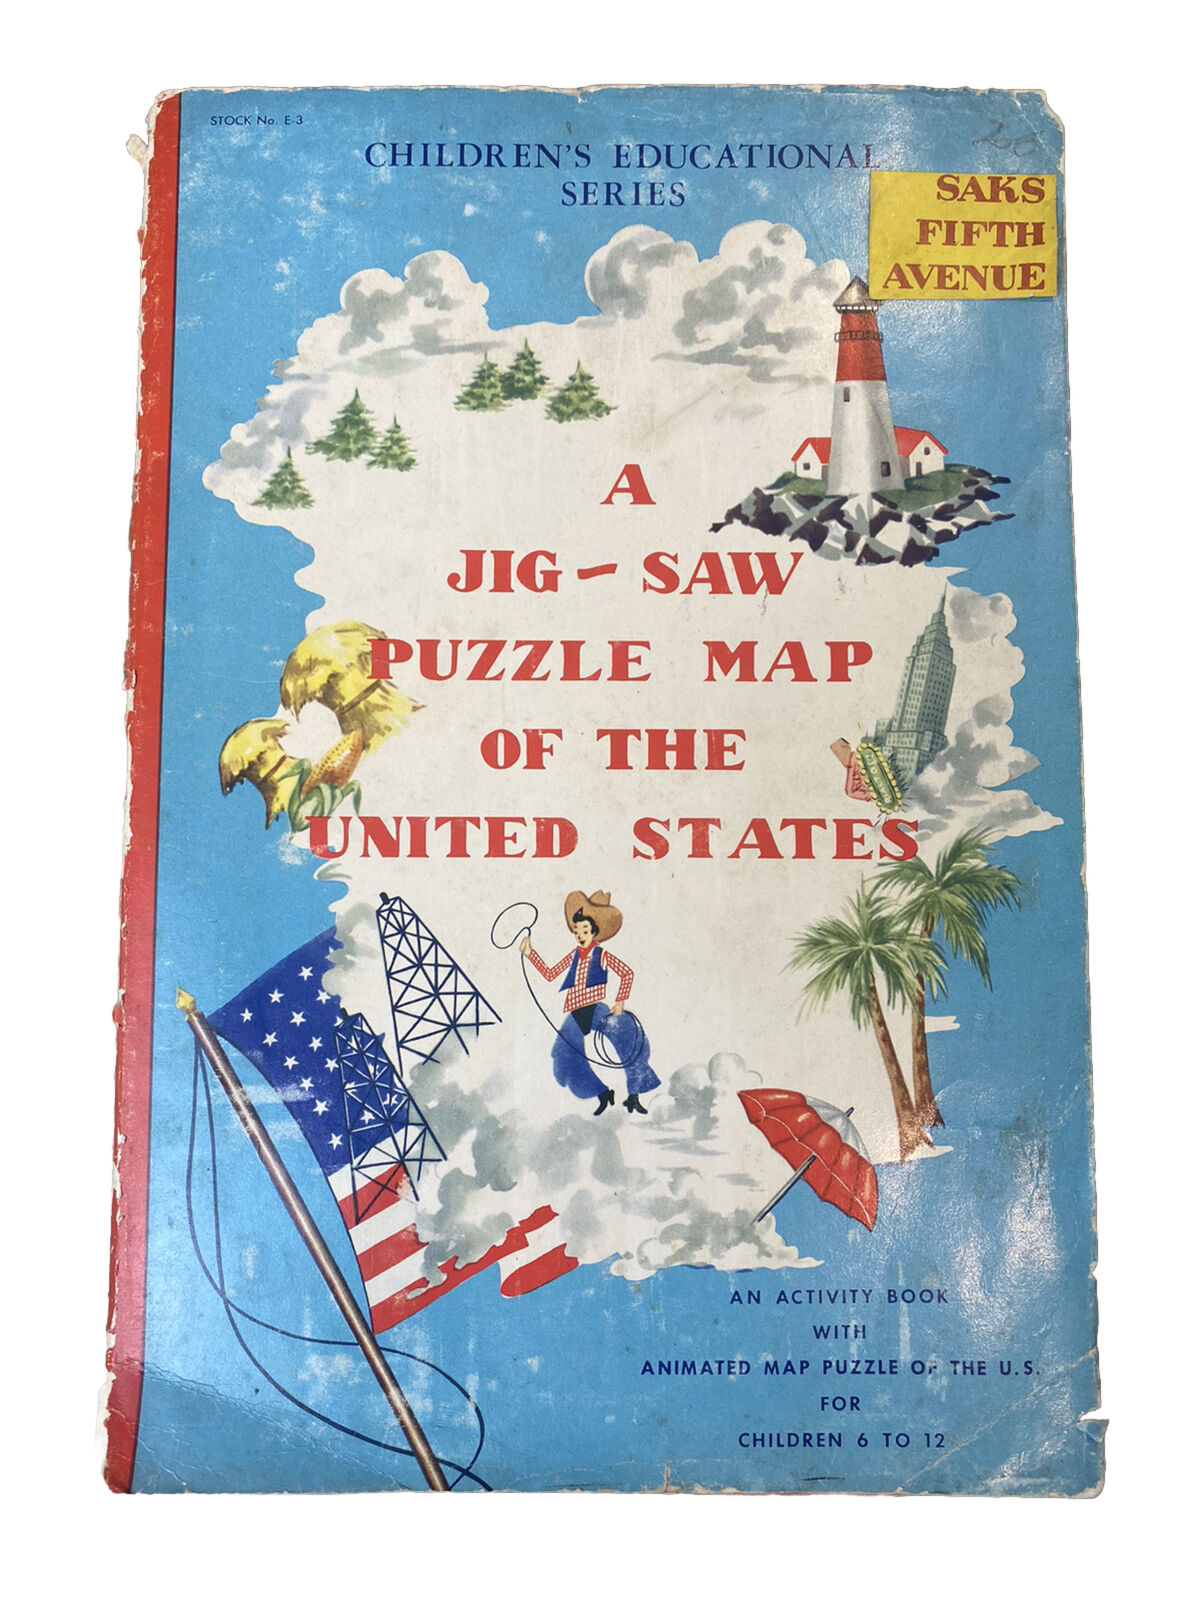 VTG Saks Fifth Avenue Jig-Saw Puzzle Map of the United States Artcraft #E-3